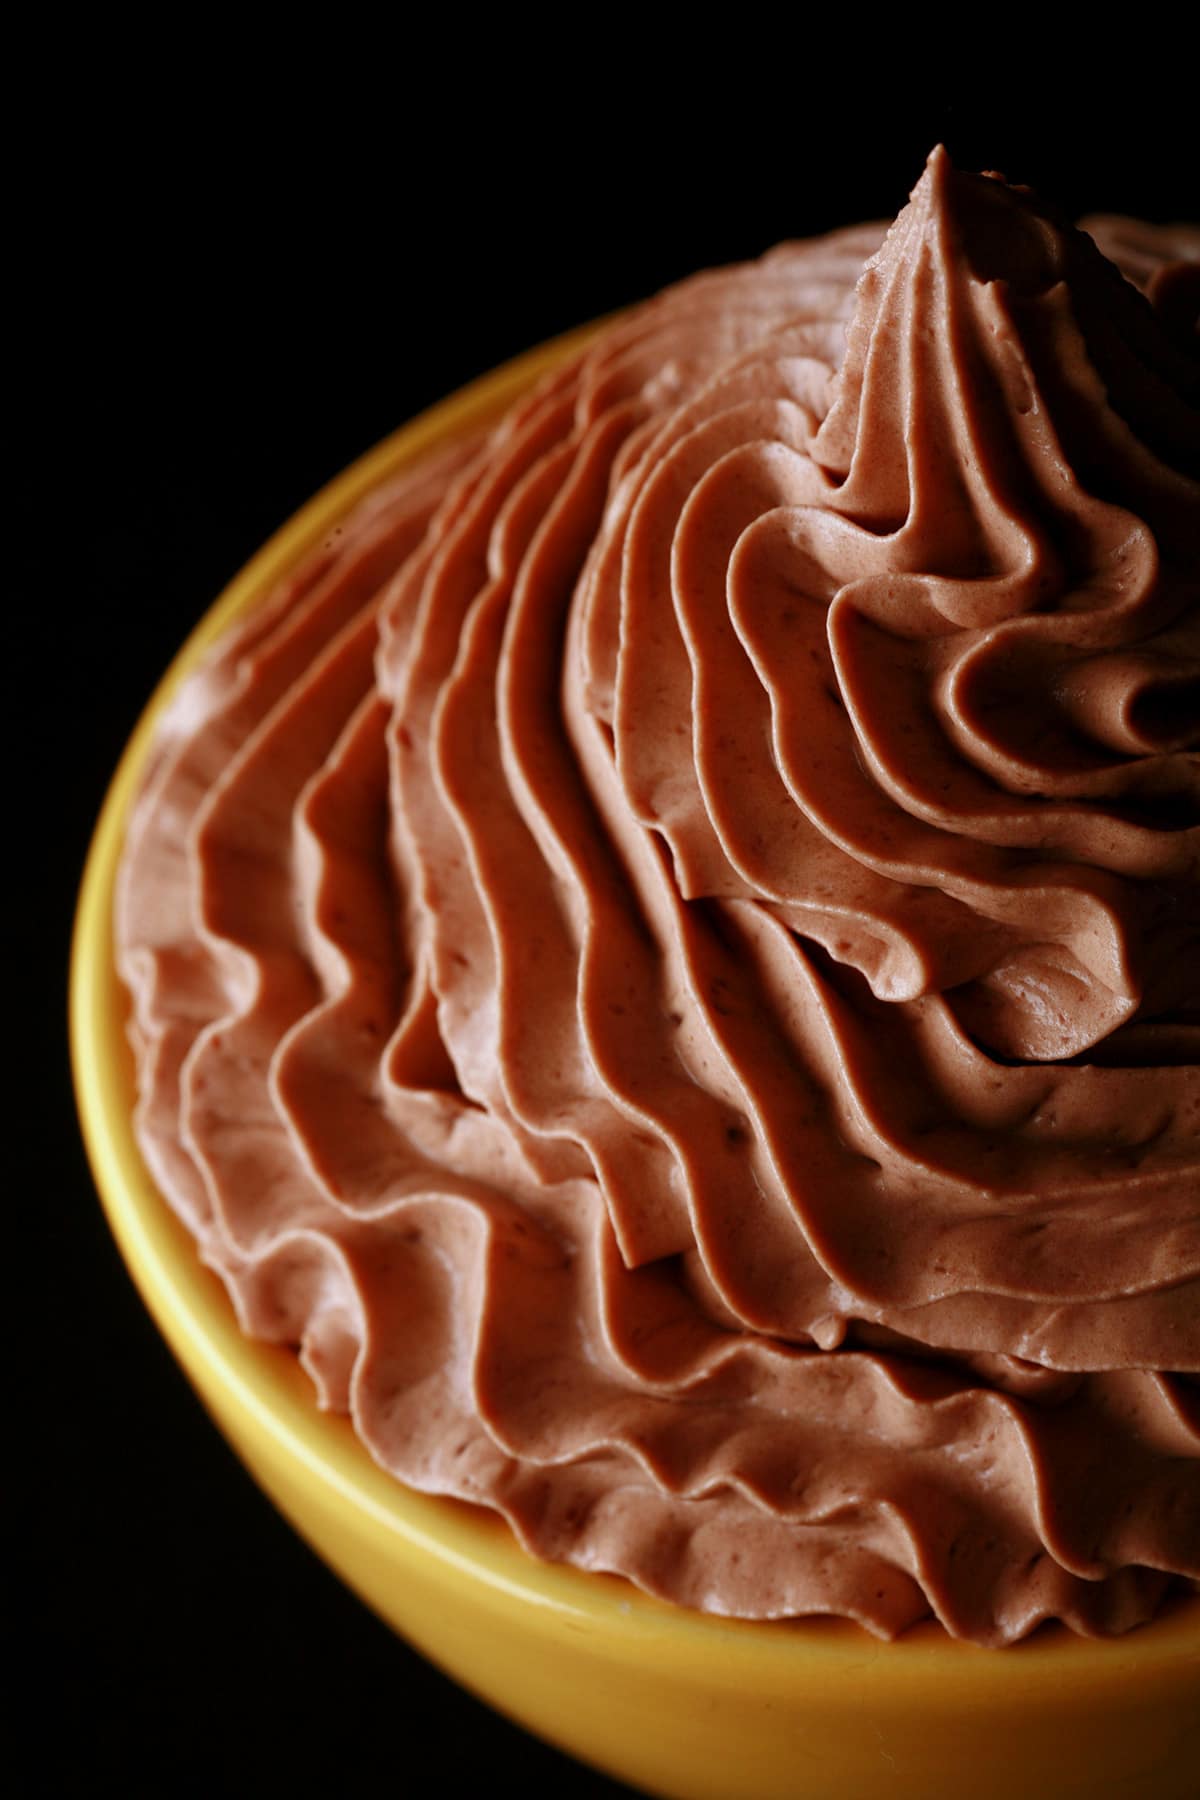 A bowl of piped whipped chocolate ganache.